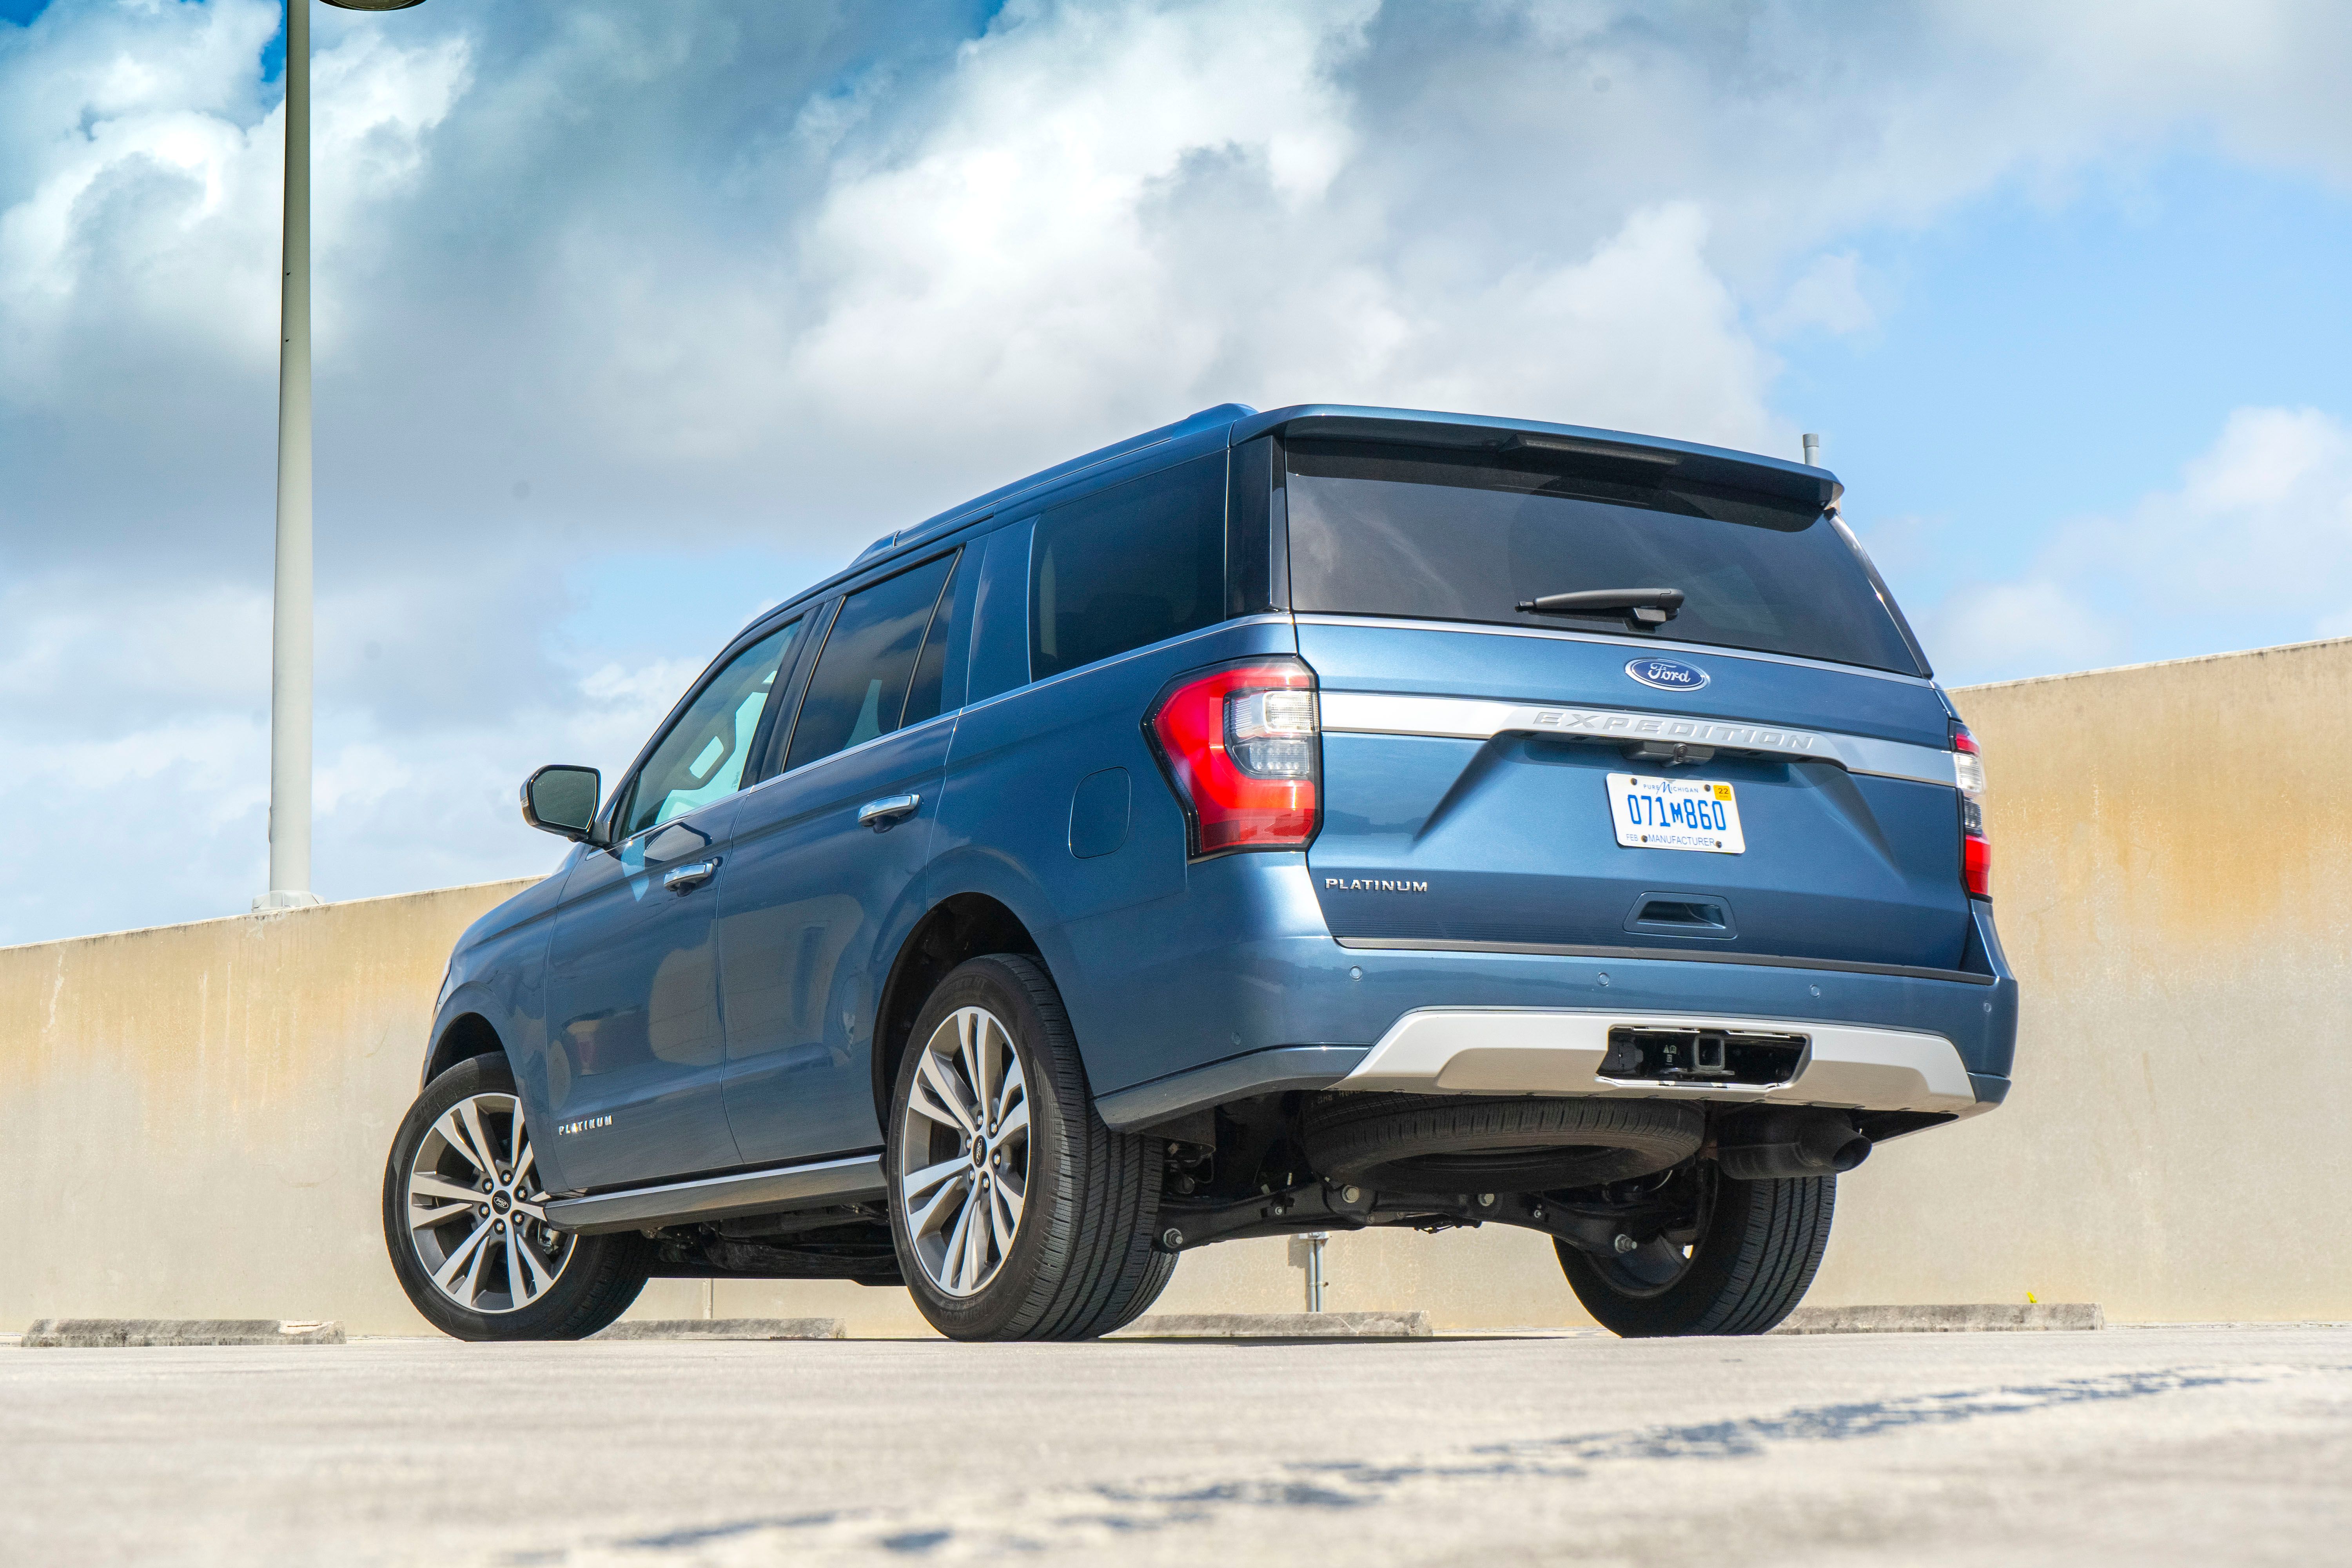 2020 Ford Expedition - Driven